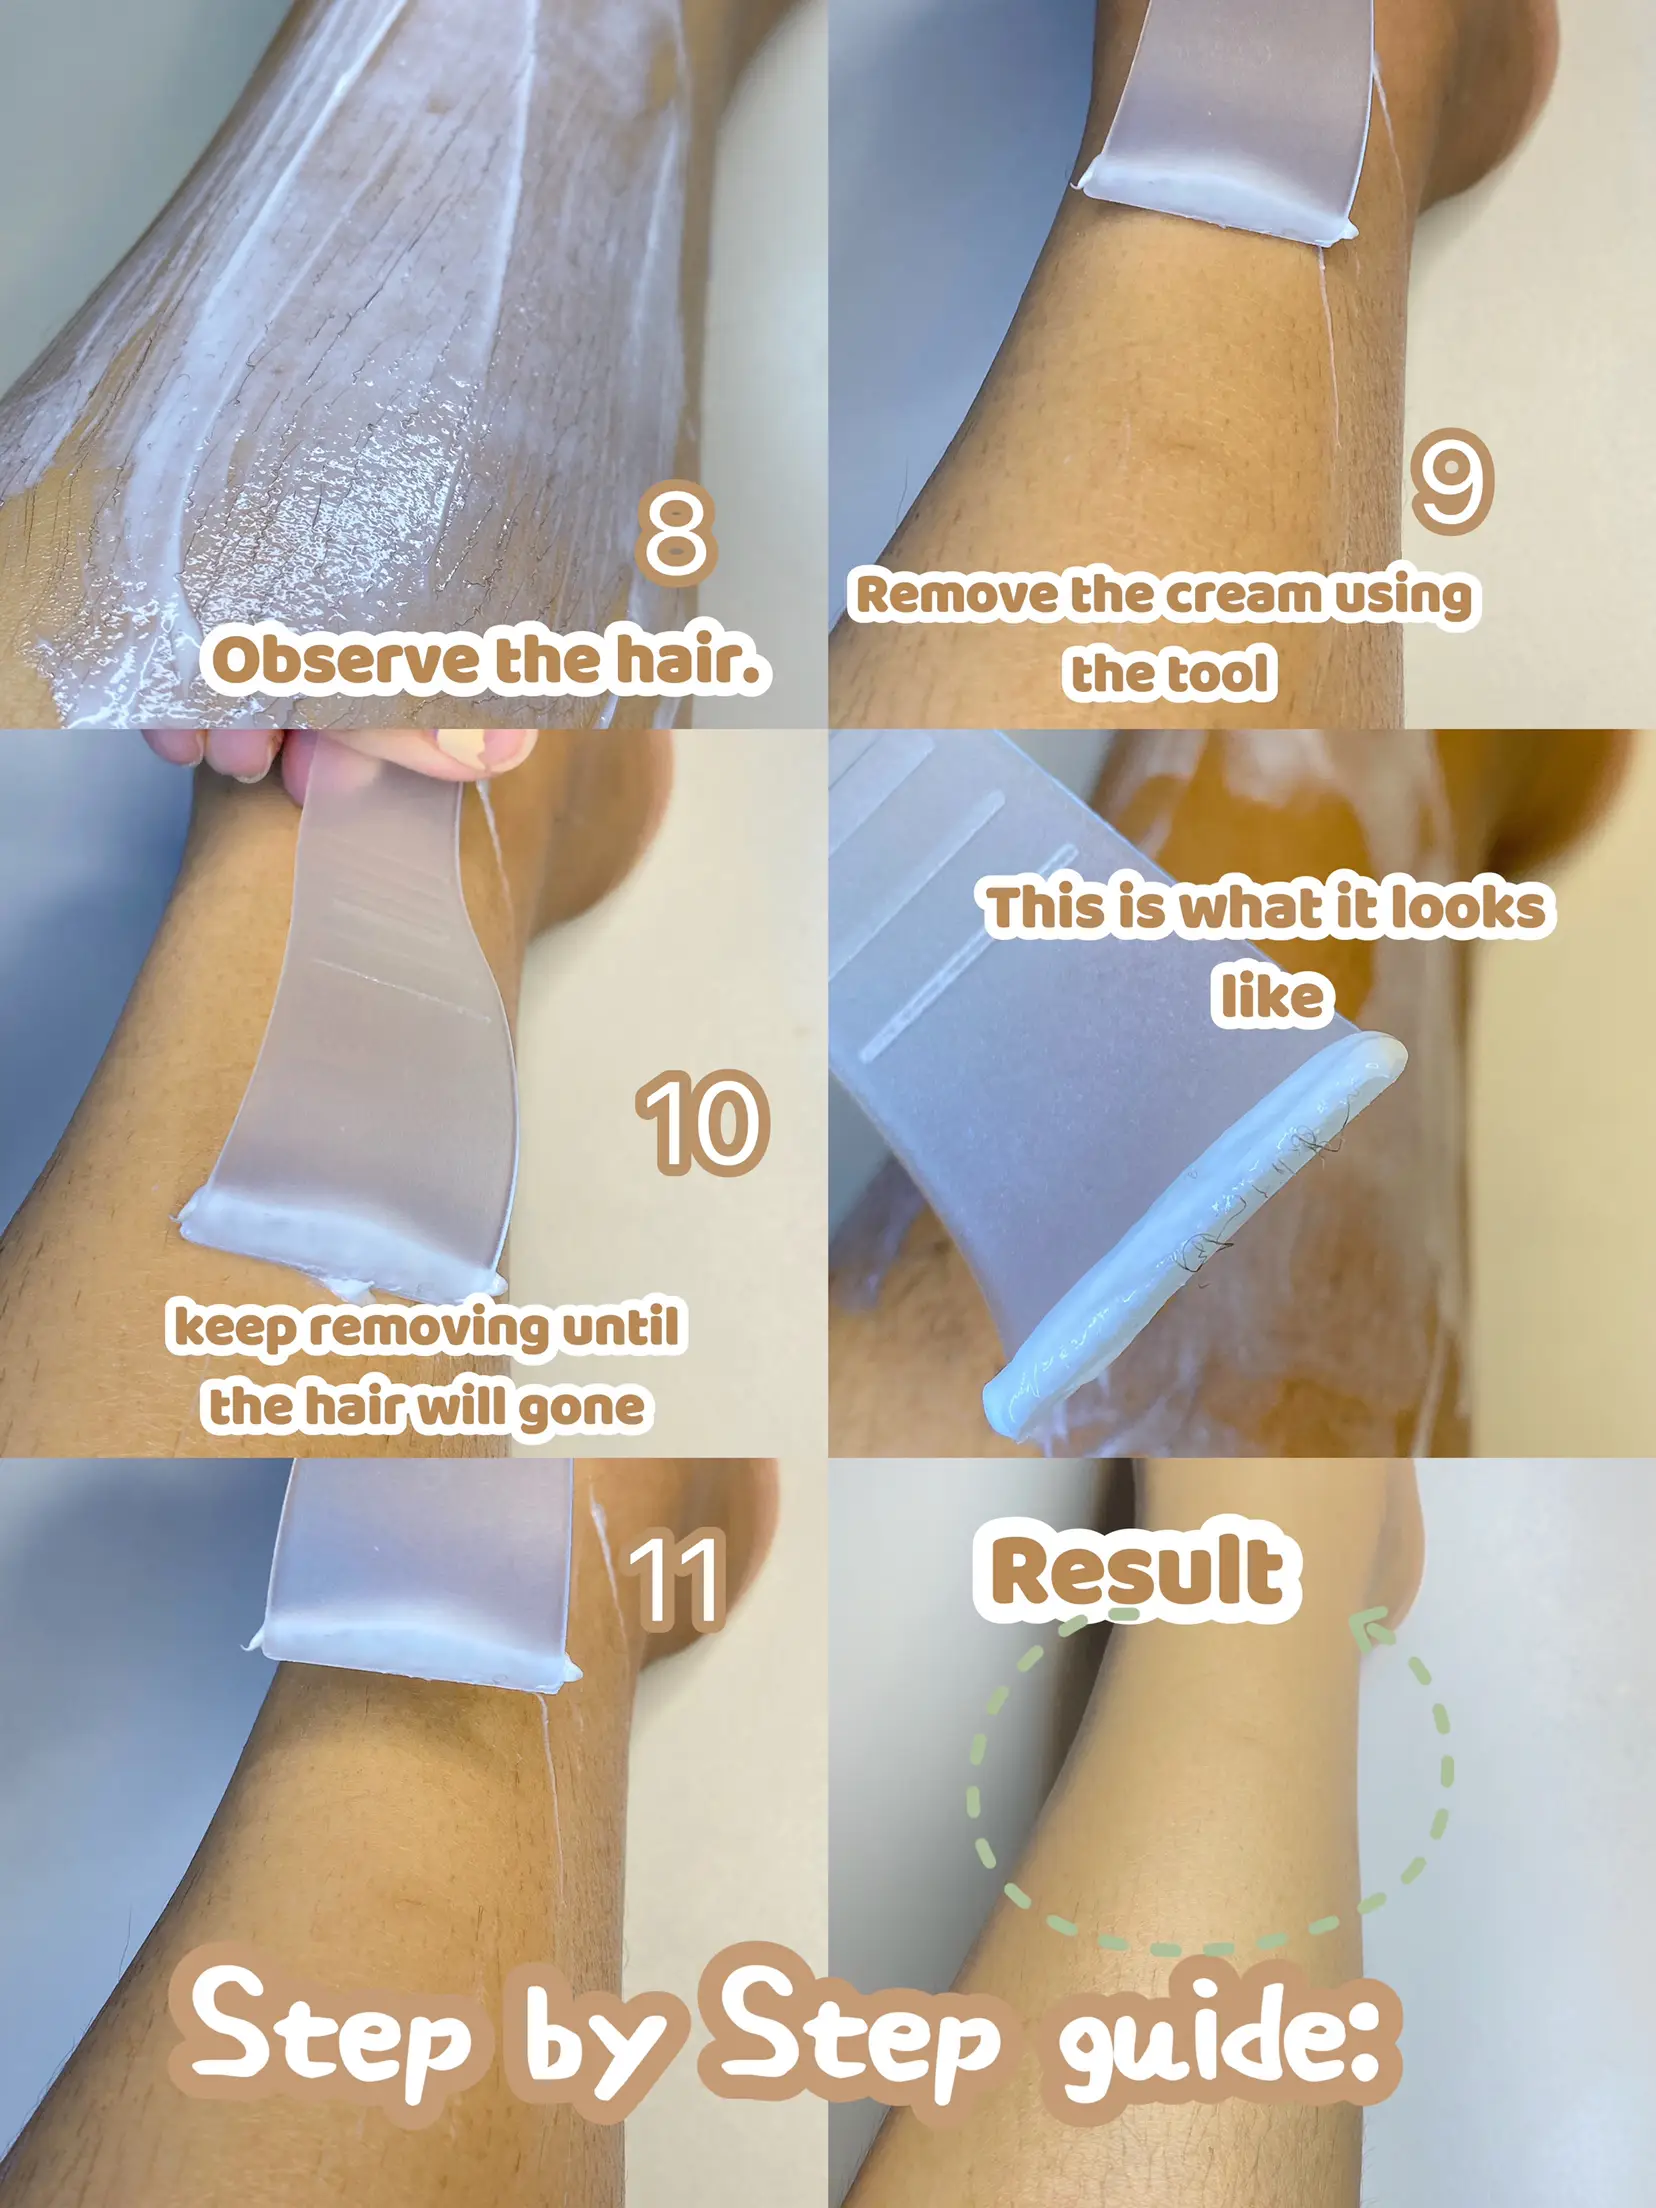 IPL treatment at home: Step-by-step guide